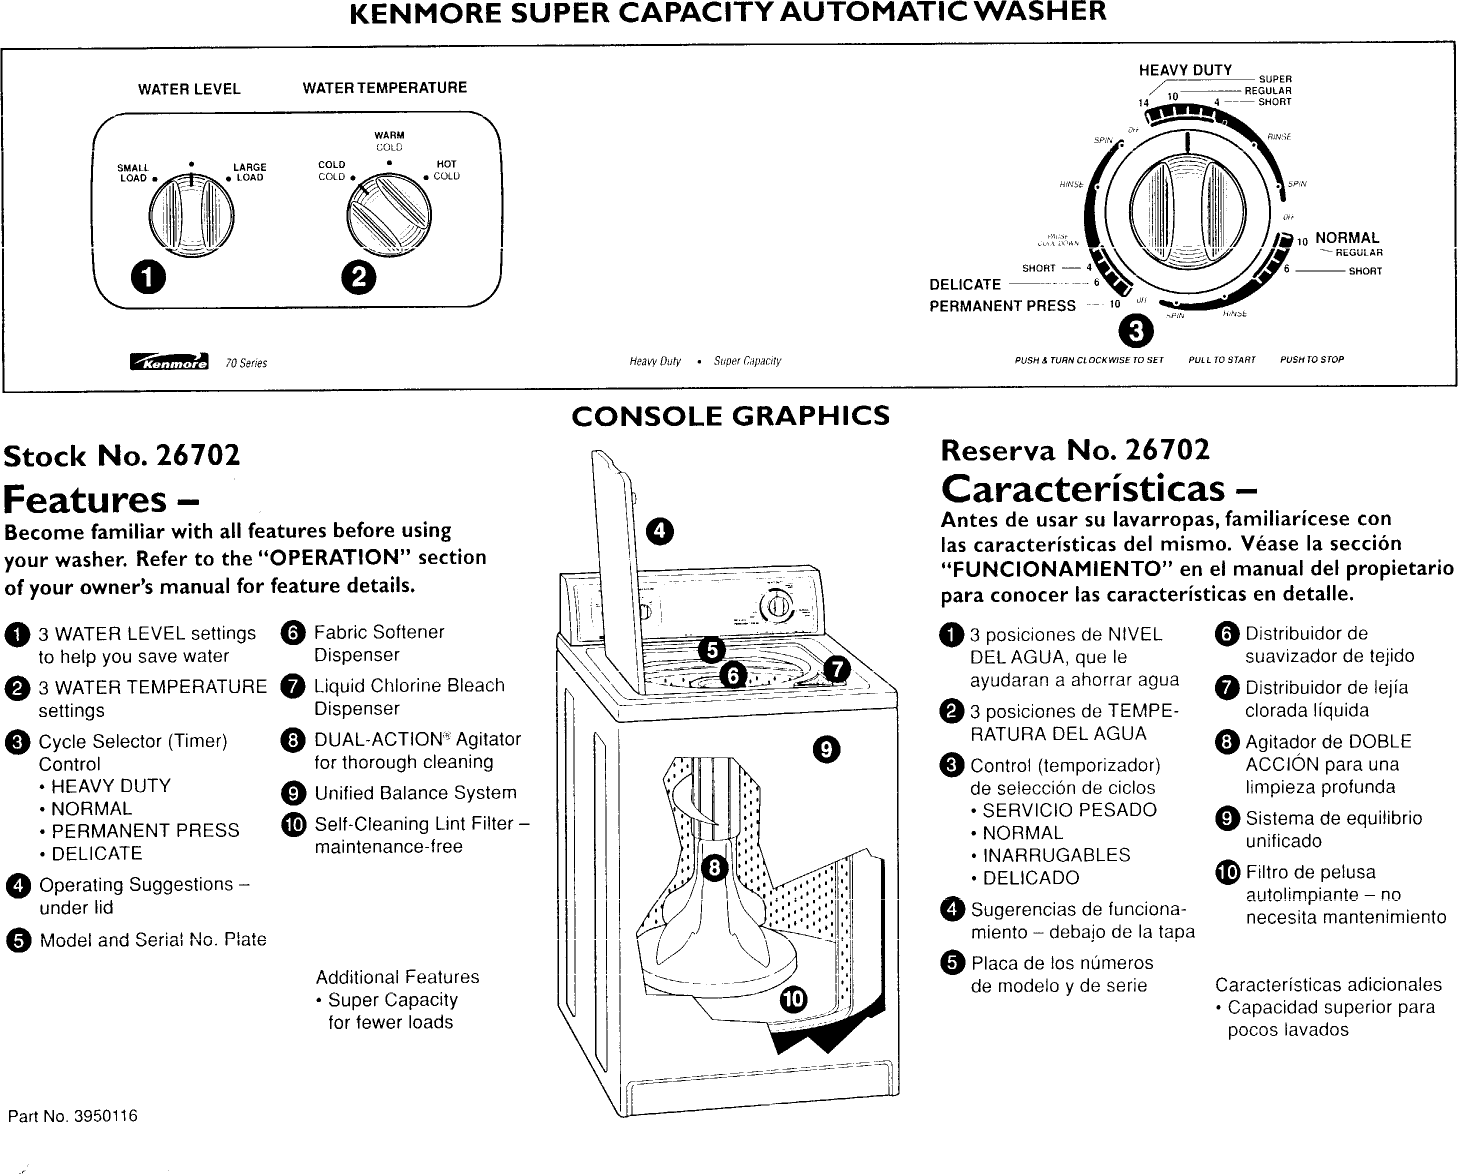 KENMORE Residential Washers Manual 97120130